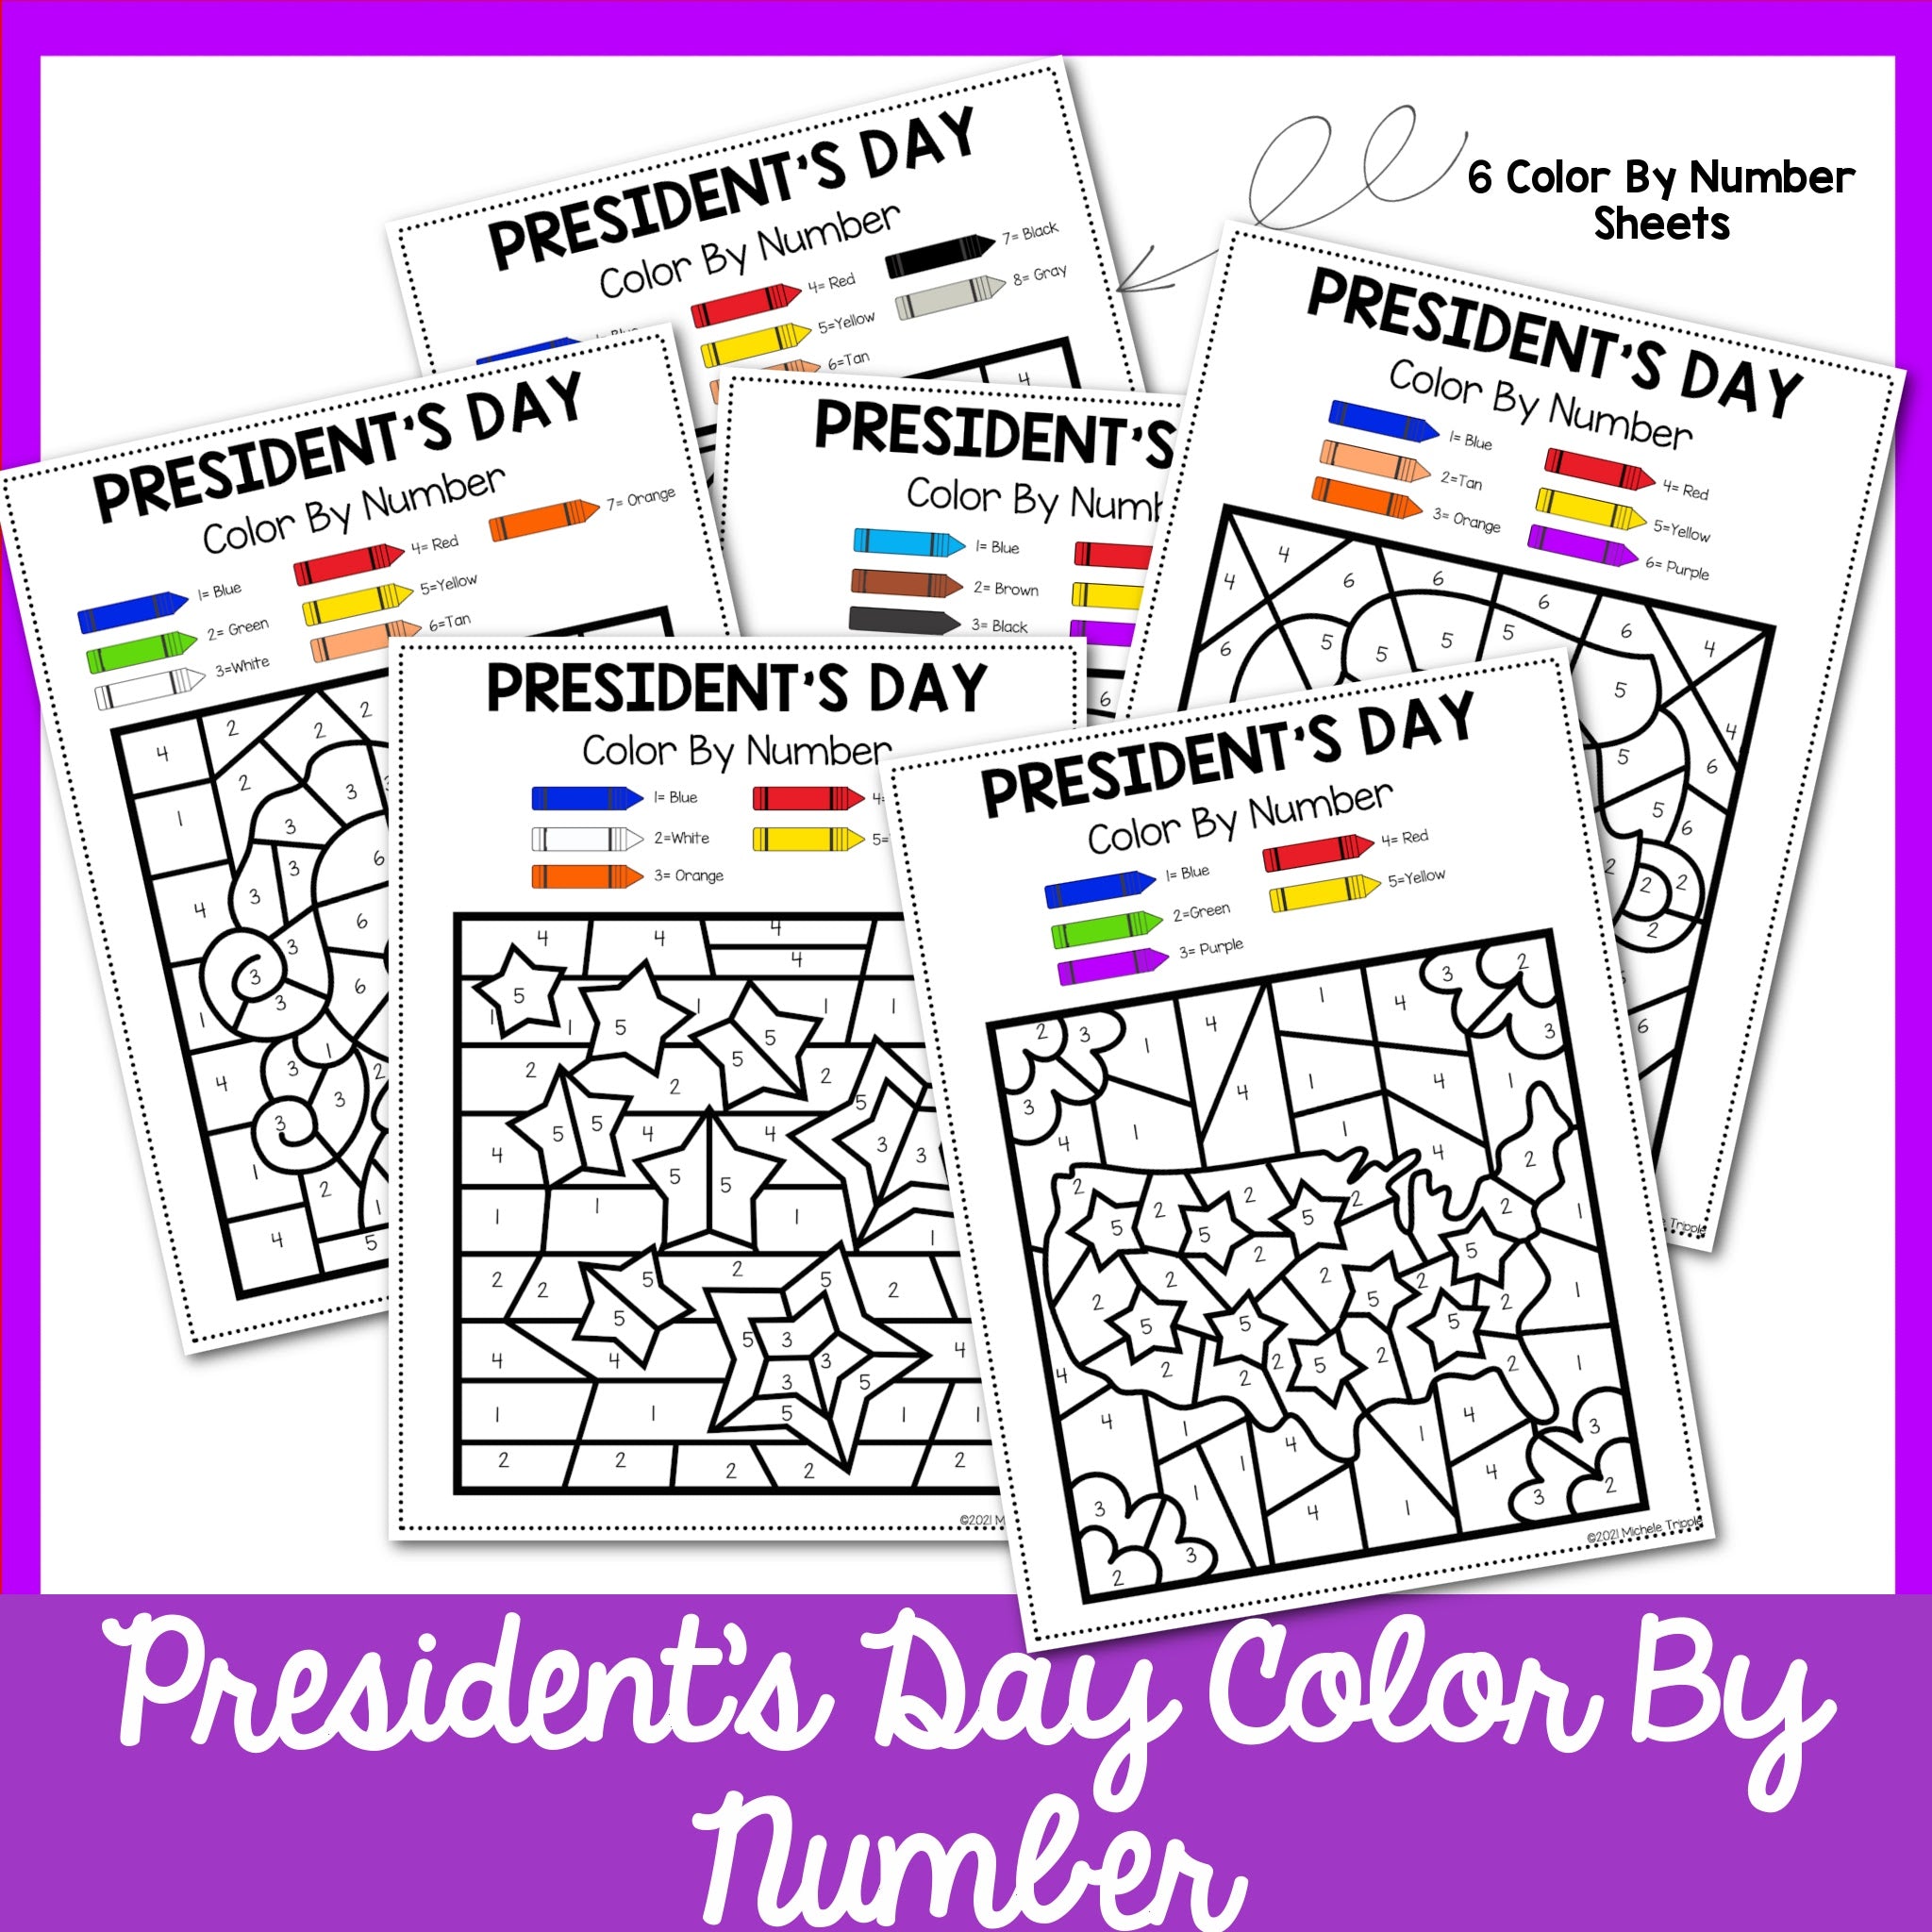 President’s Day Color by Number